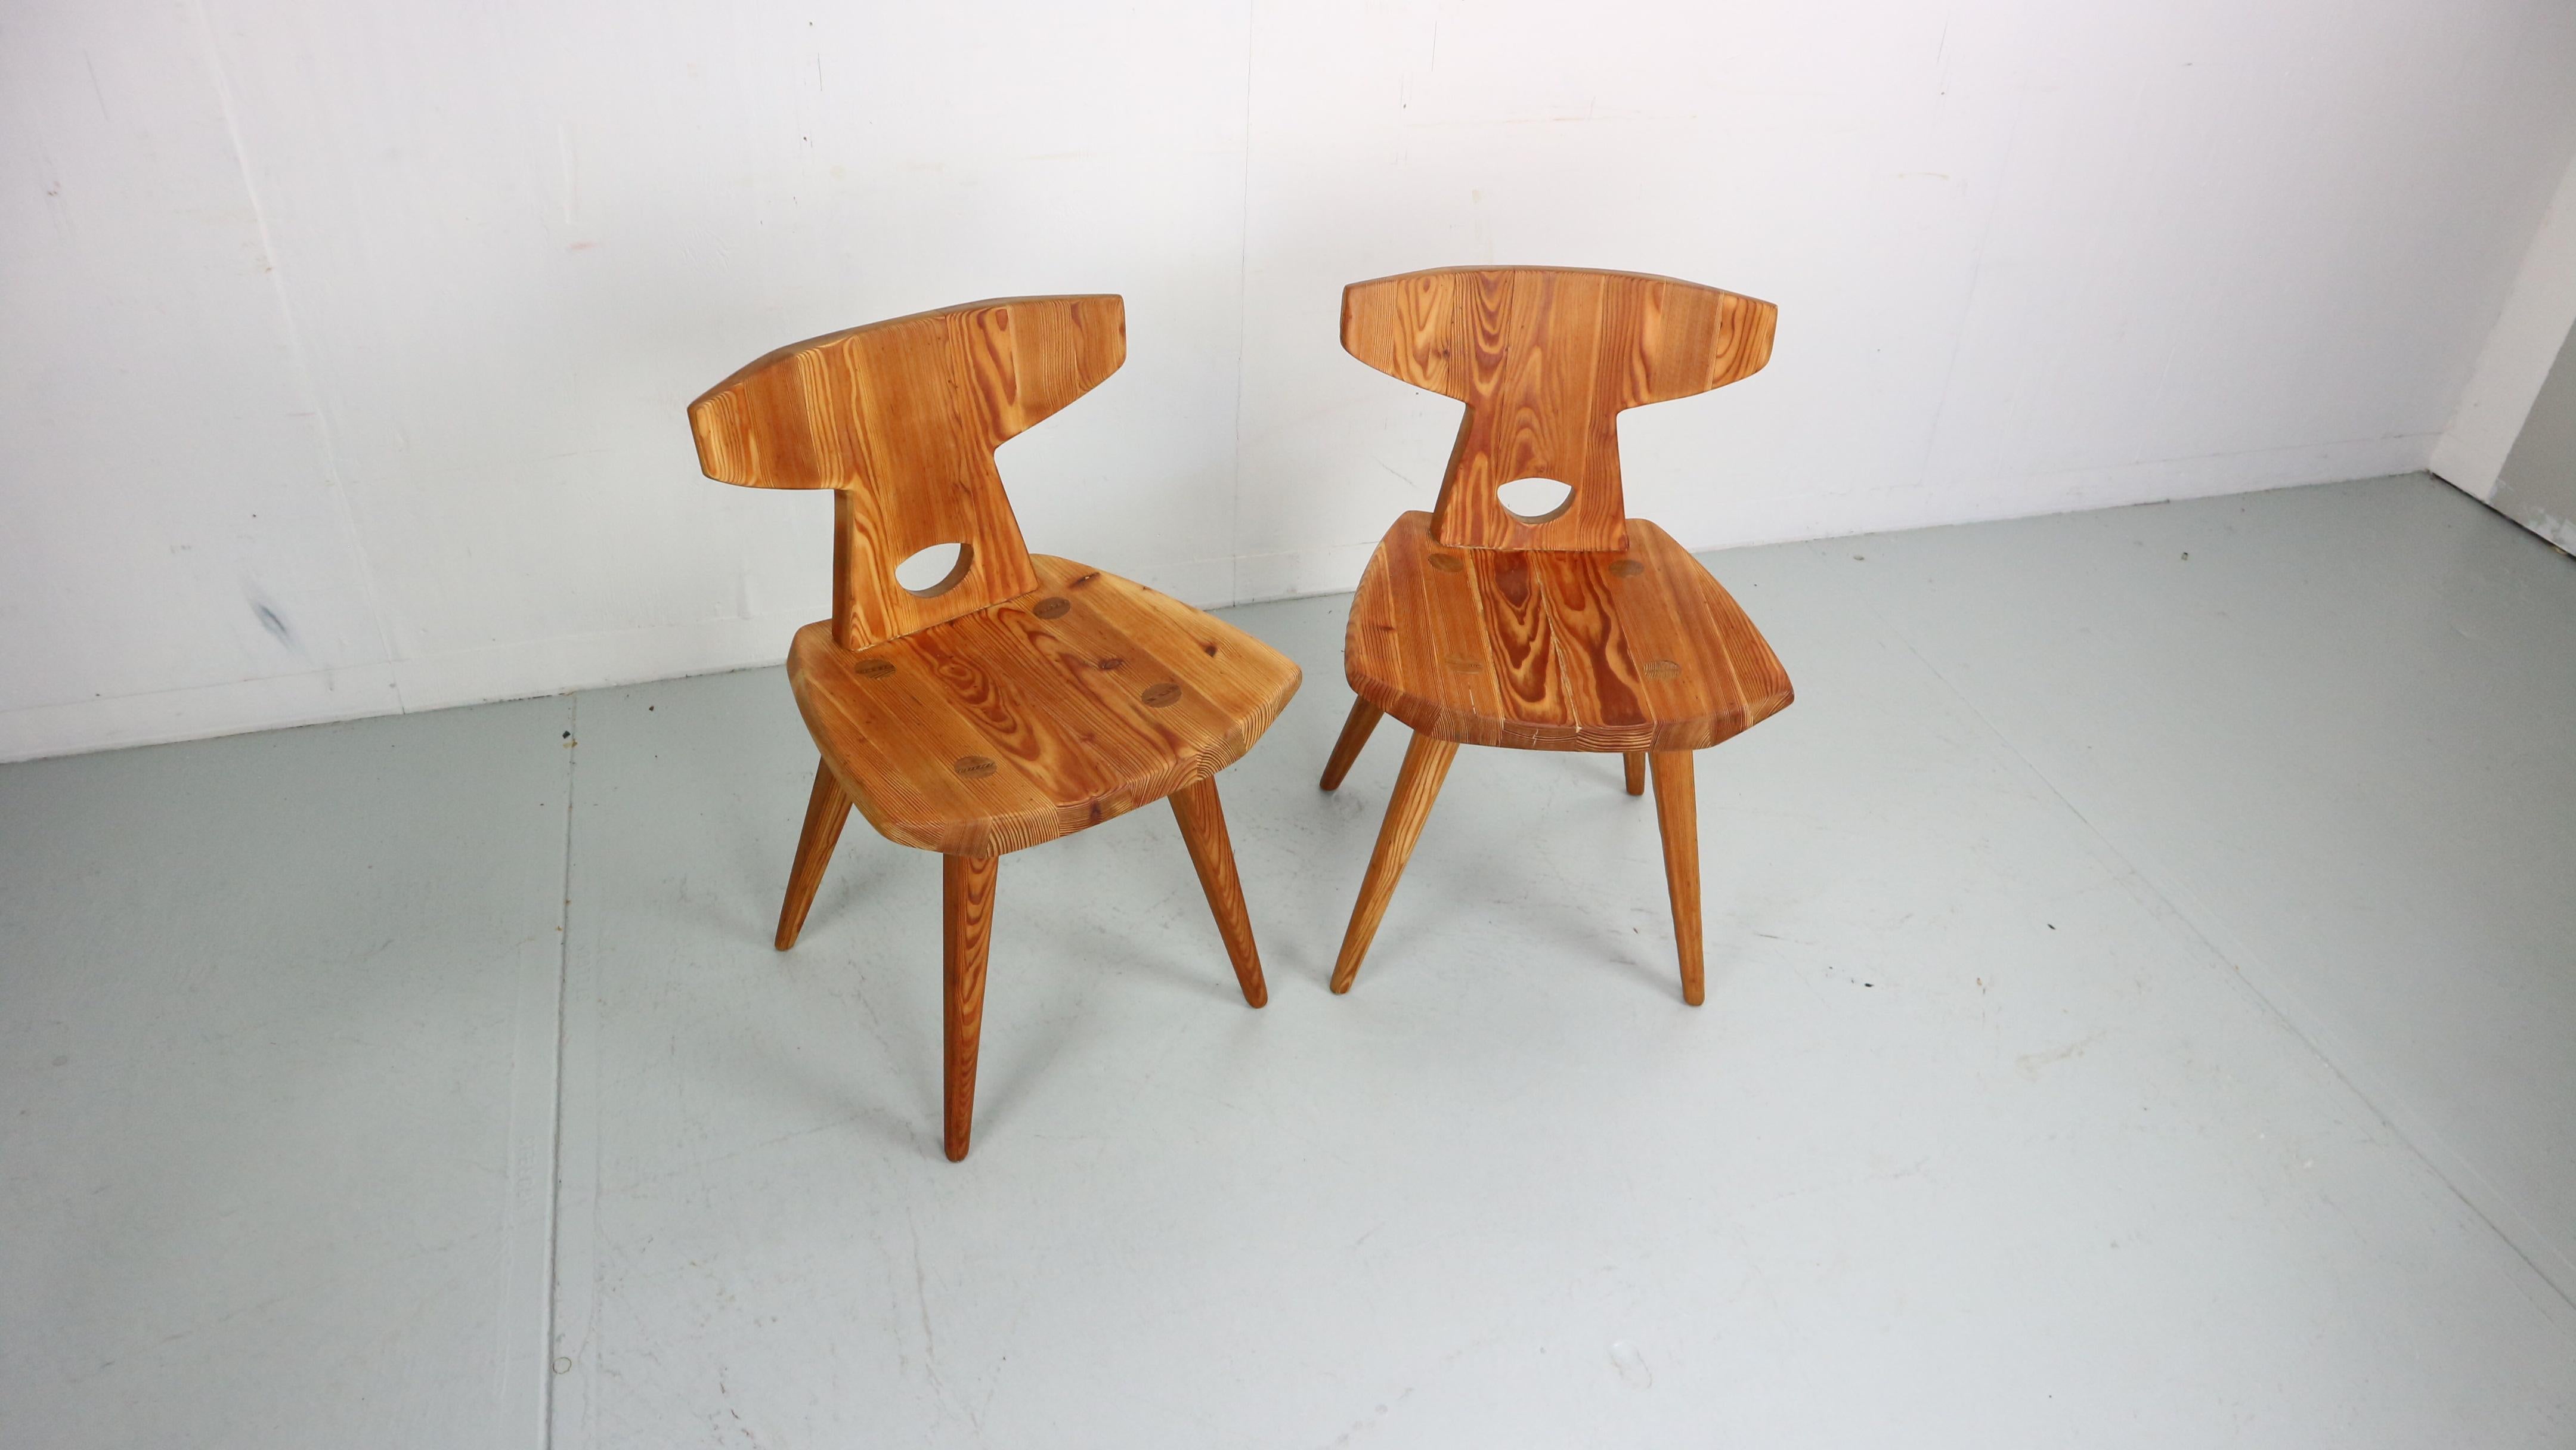 Fantastic set of 2 chairs designed by Jacob Kielland-Brandt for I. Christiansen, Denmark 1960. The designer won the Cabinetmaker Guild price in Denmark 1960. Super hand crafted chairs in solid pine wood. Amazing shaped and superbly finished. 

We